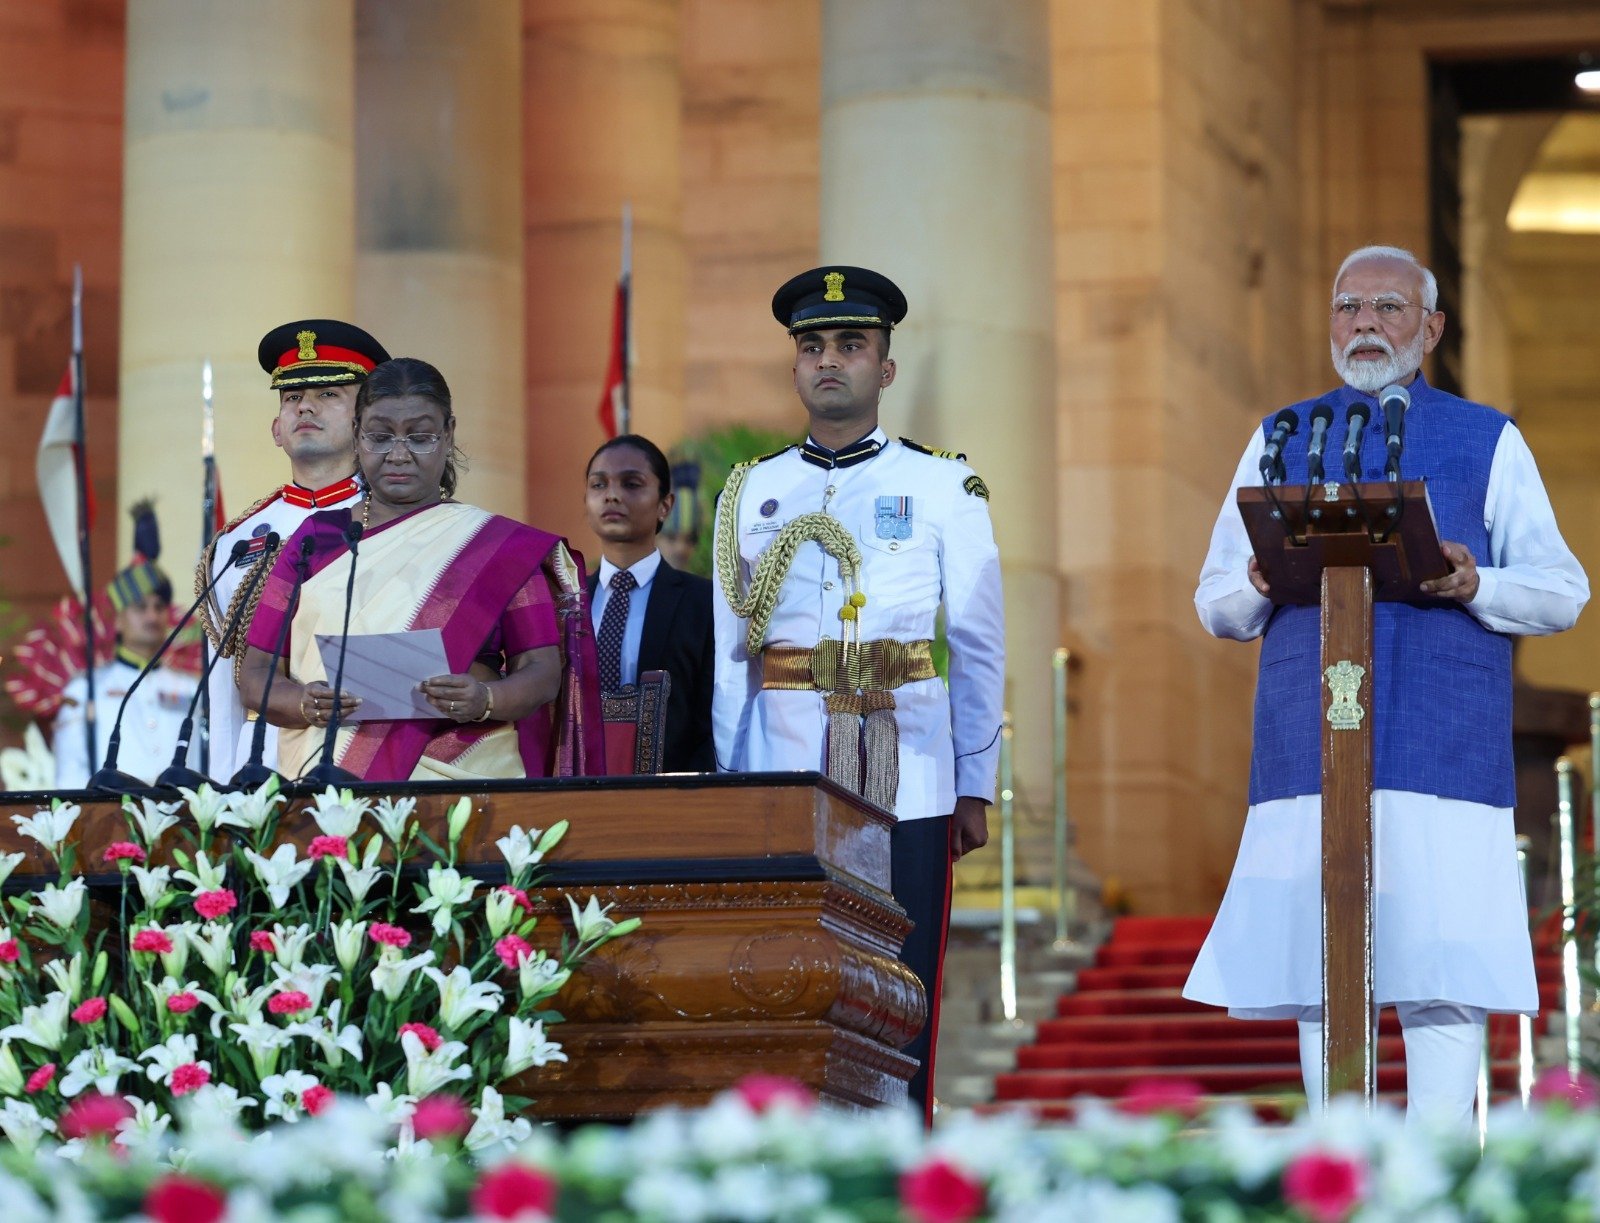 Narendra Modi takes oath as Prime Minister for the third term